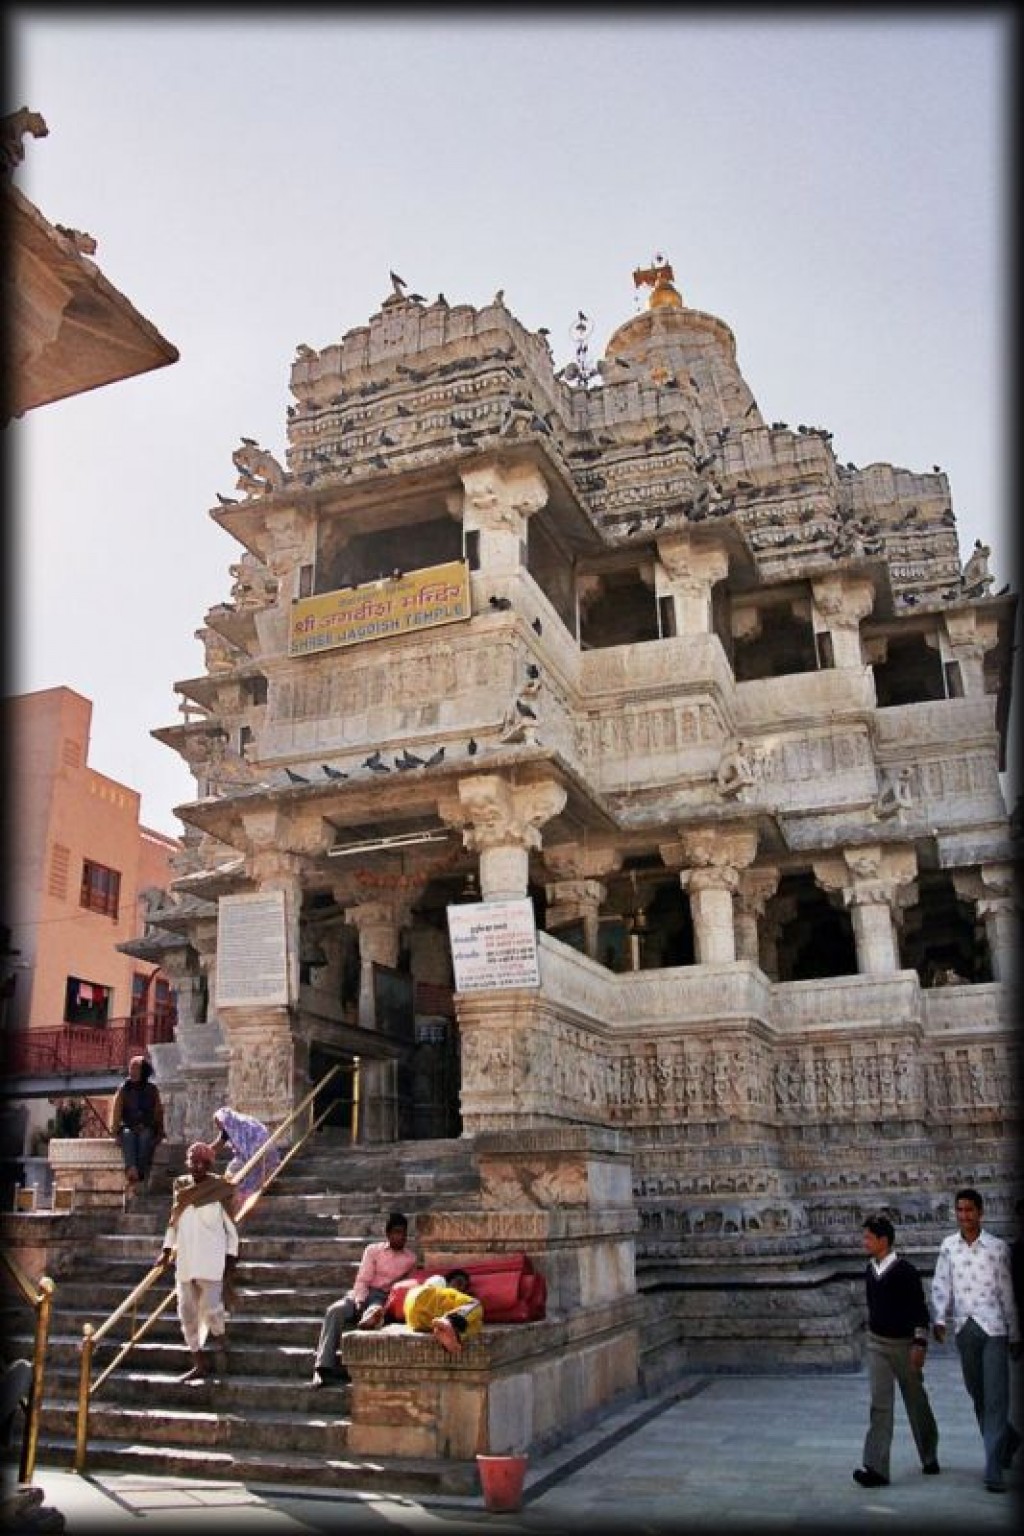 Shree Jagdish Mandir Temple.  A 17th century temple in the middle of the Old City dedicated to Vishnu's avatar Jagannath.